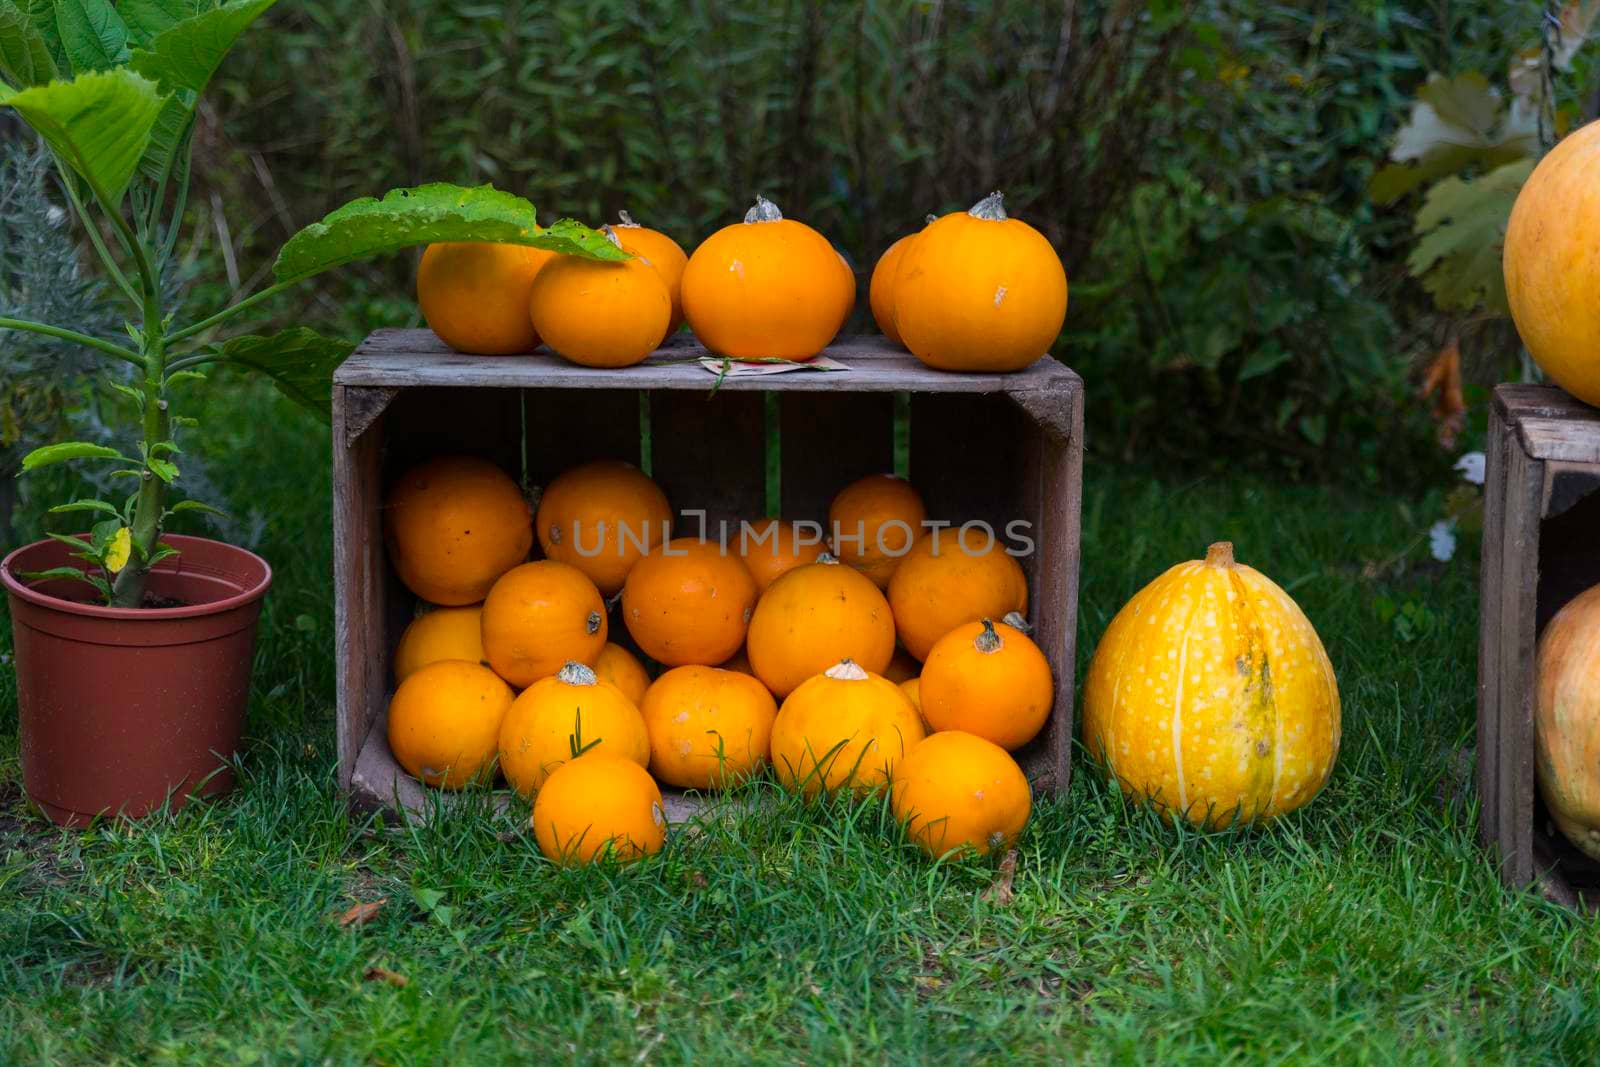 grouop of gourds or pumpkins by compuinfoto